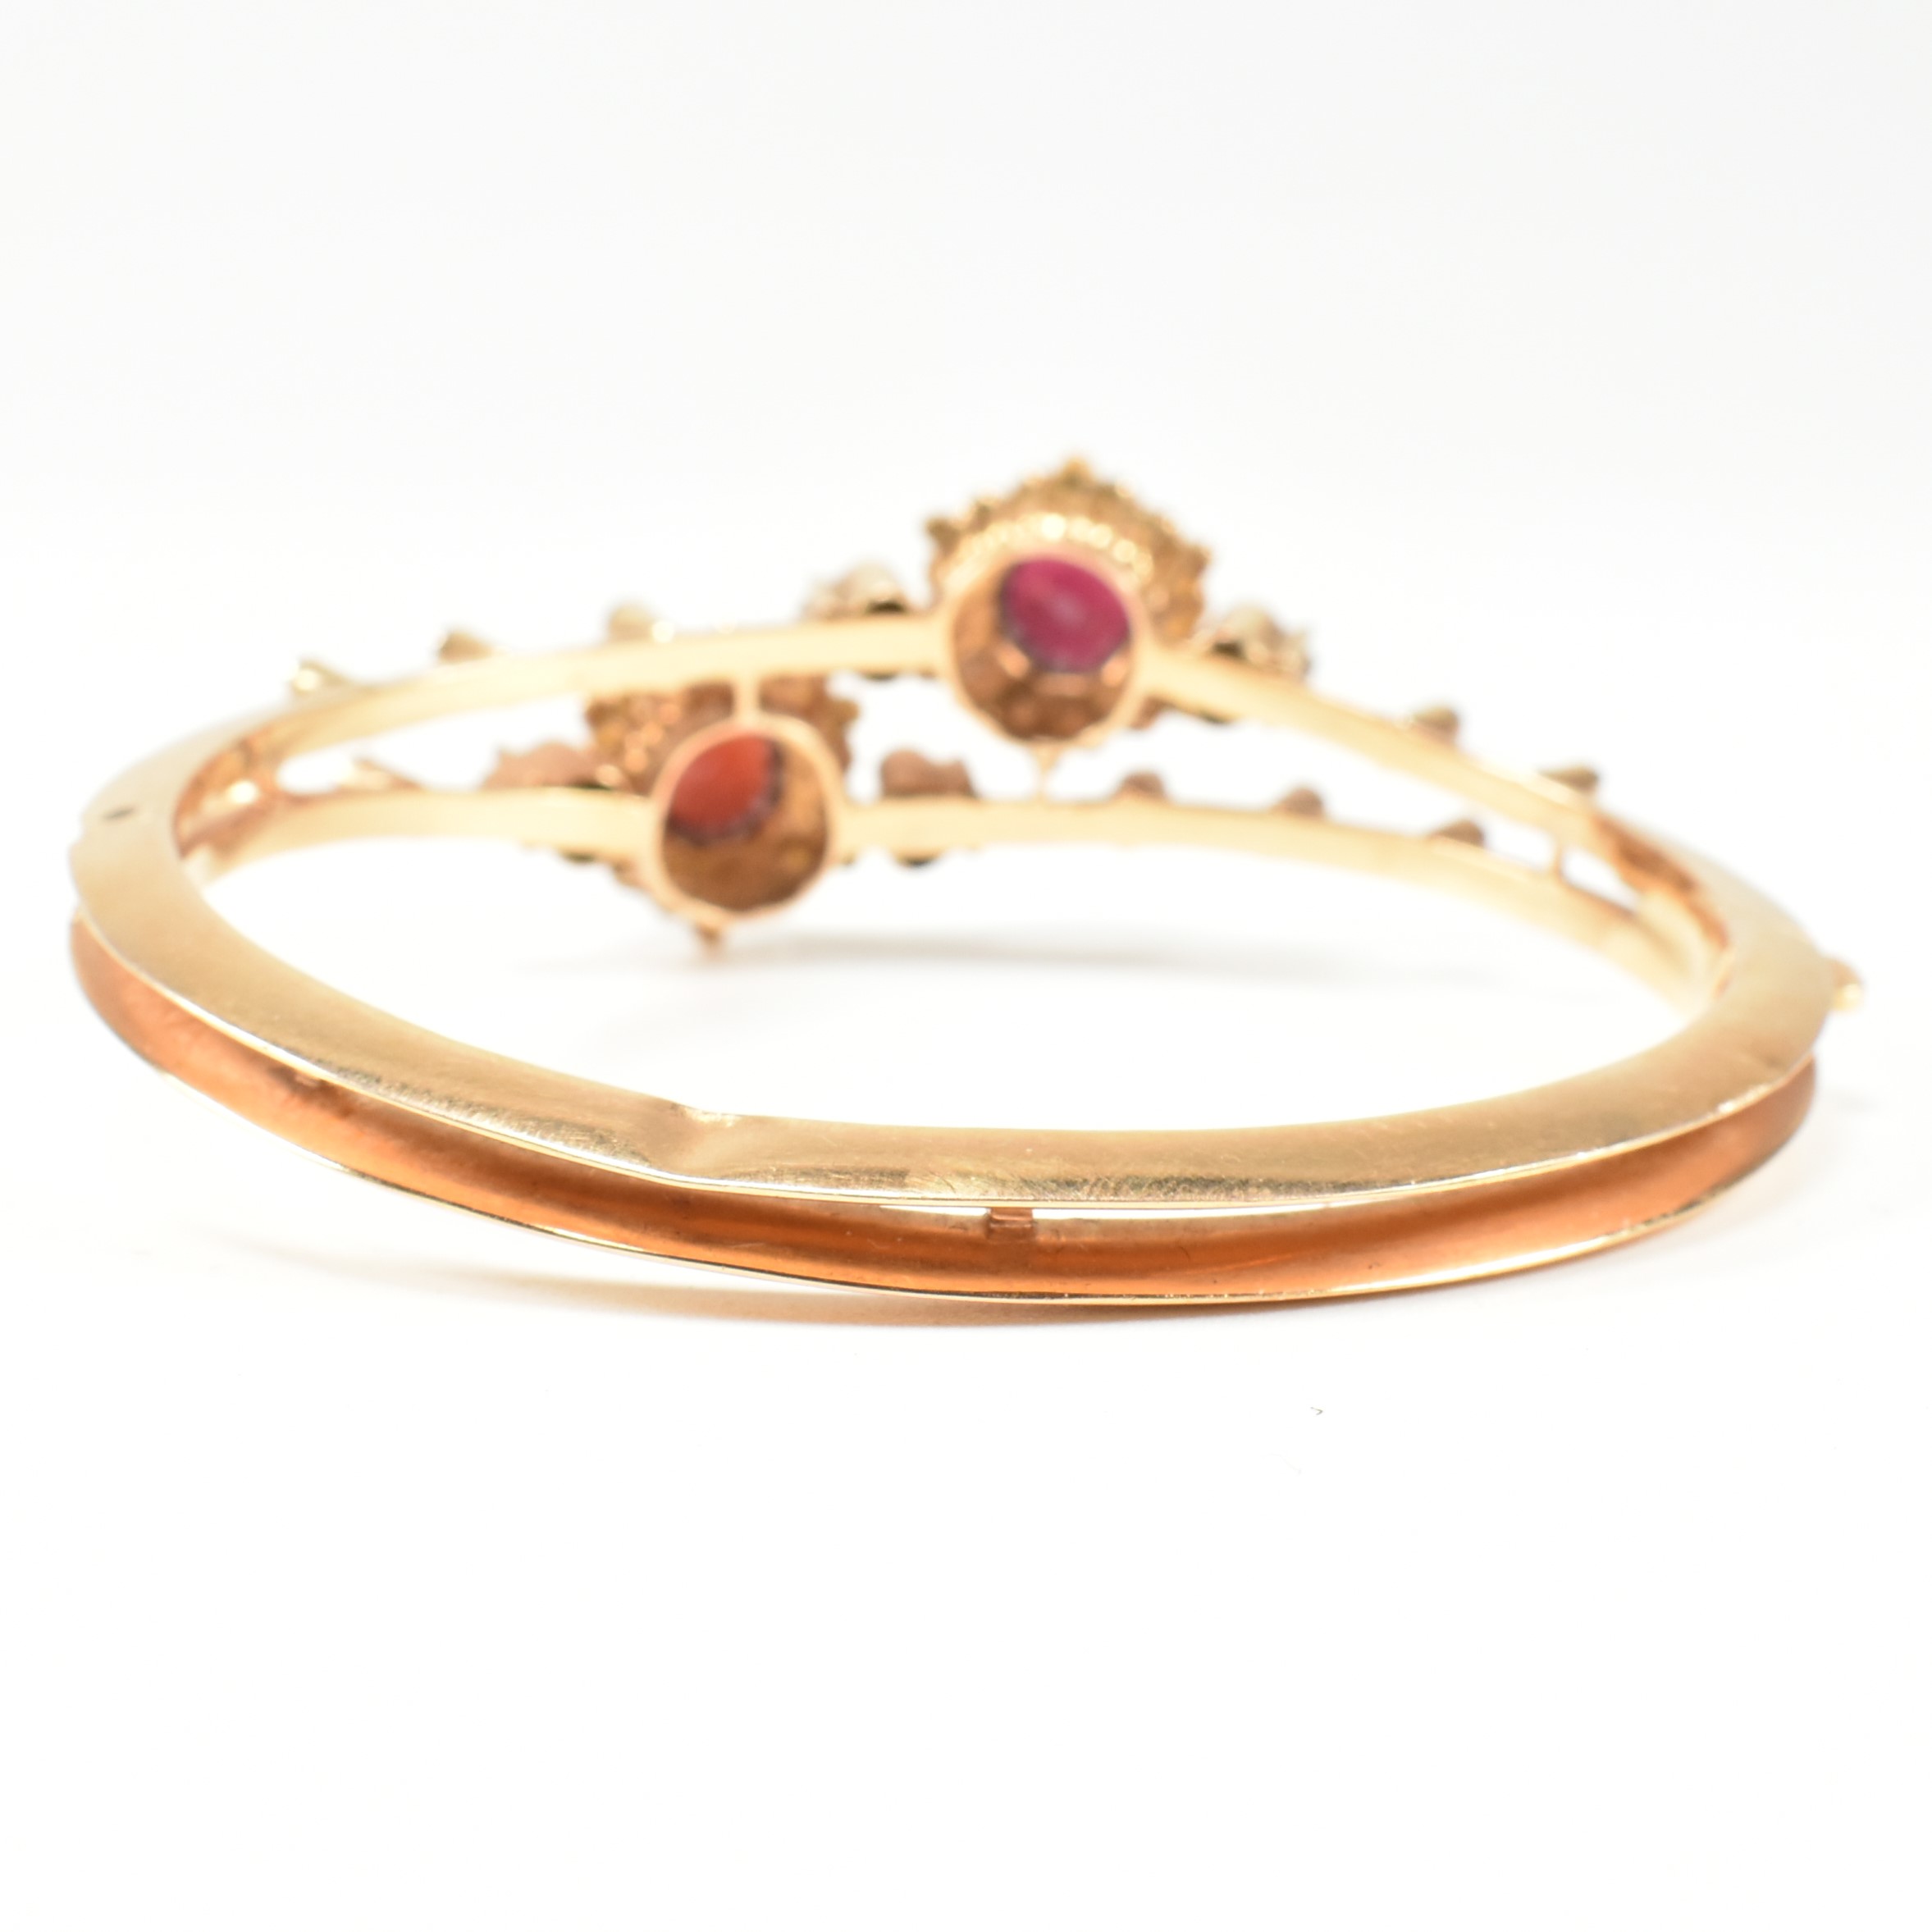 19TH CENTURY VICTORIAN PEARL & GARNET CLUSTER BANGLE - Image 3 of 9